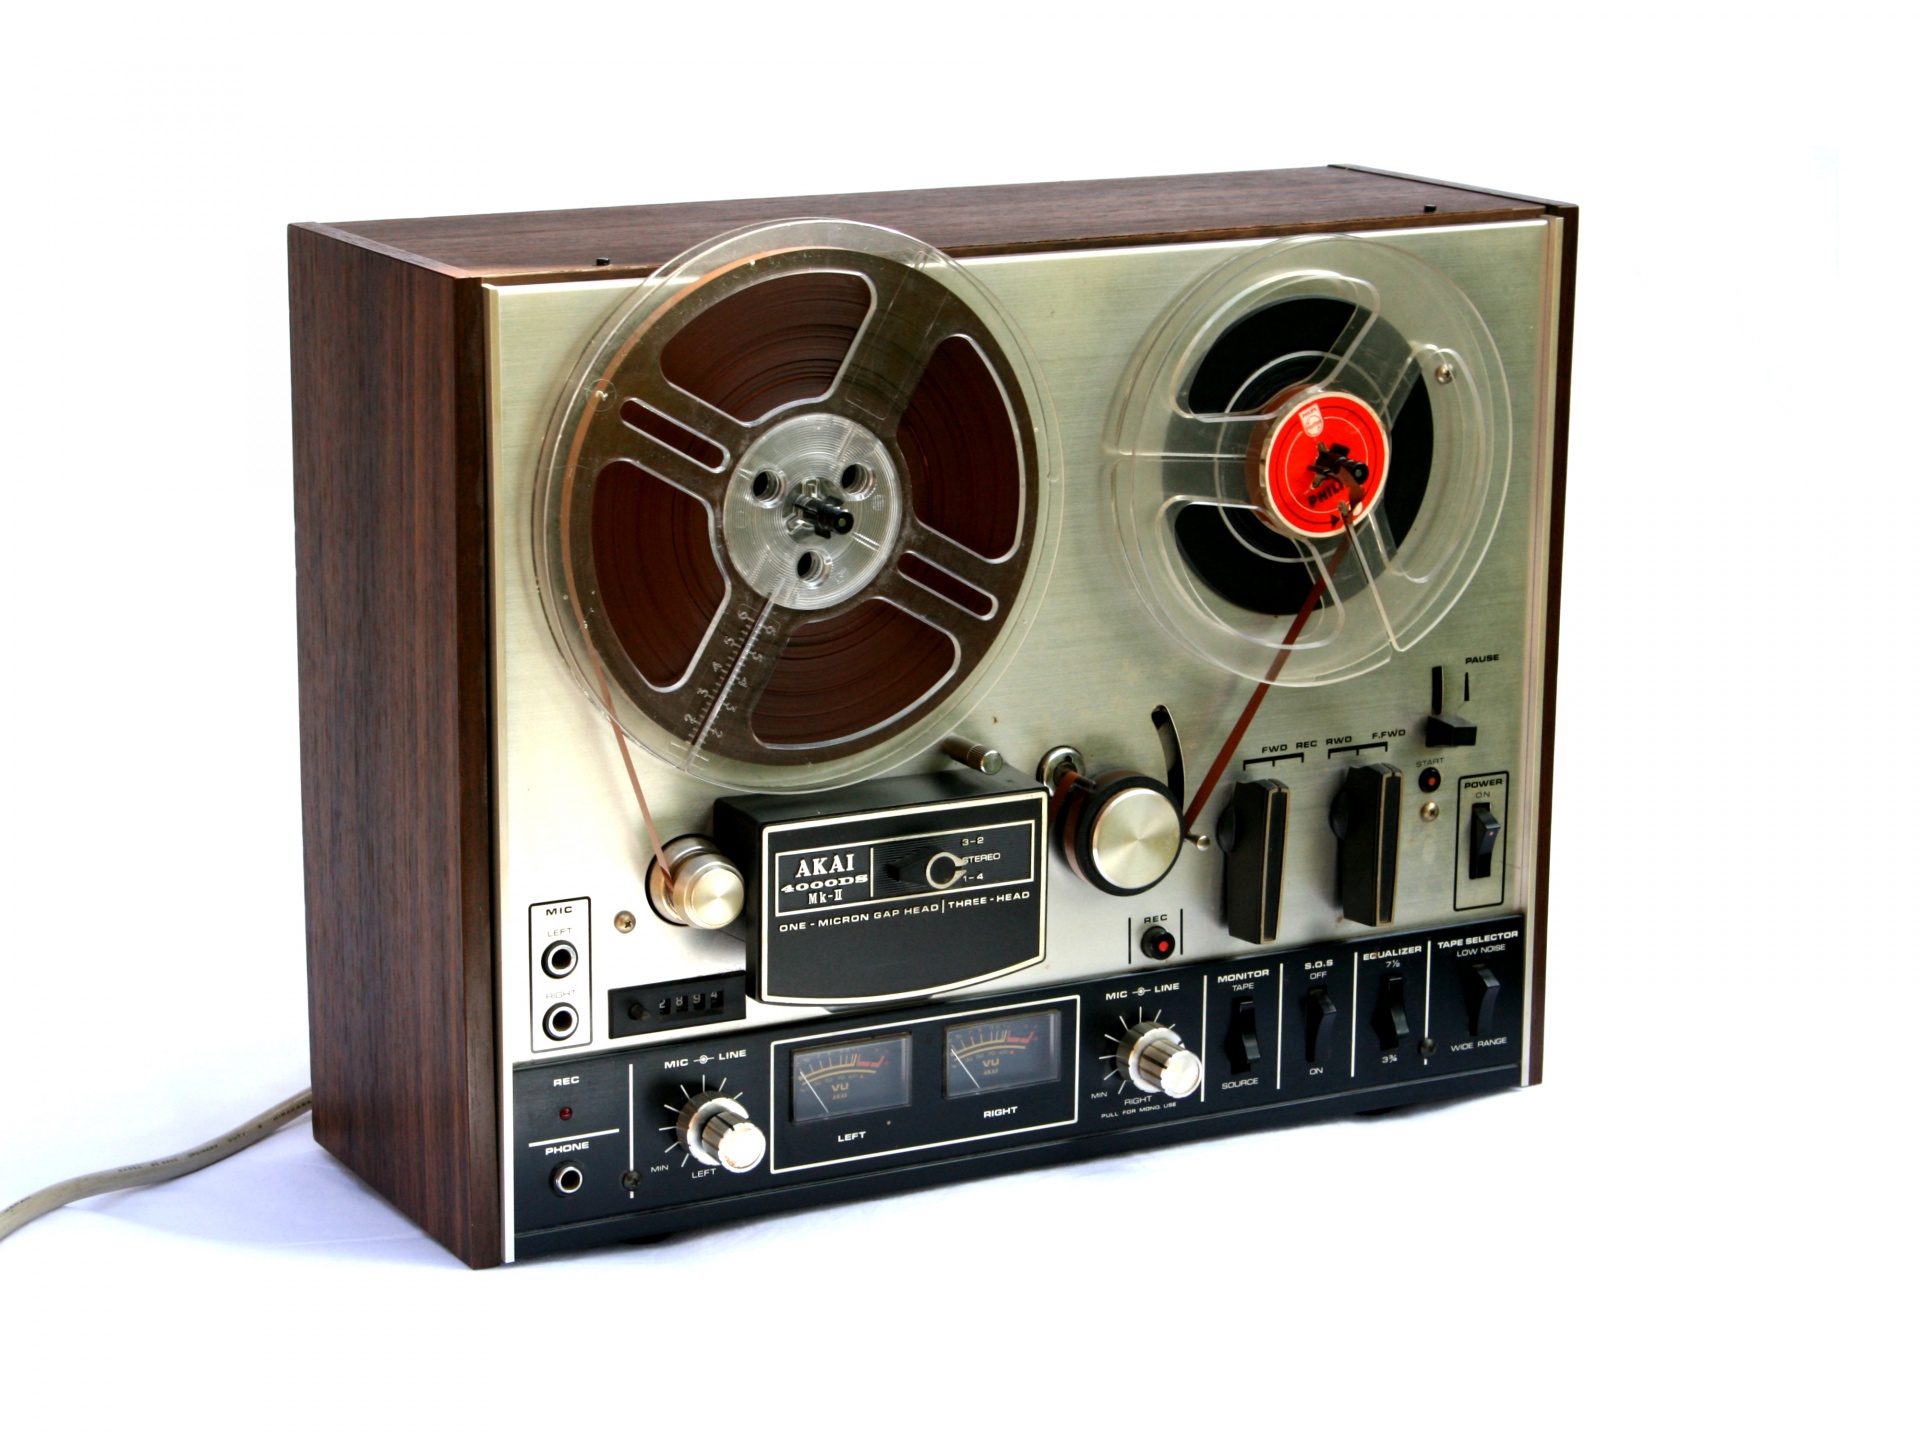 Akai 4000ds,reel to reel,tape recorder,60s,audio - free image from